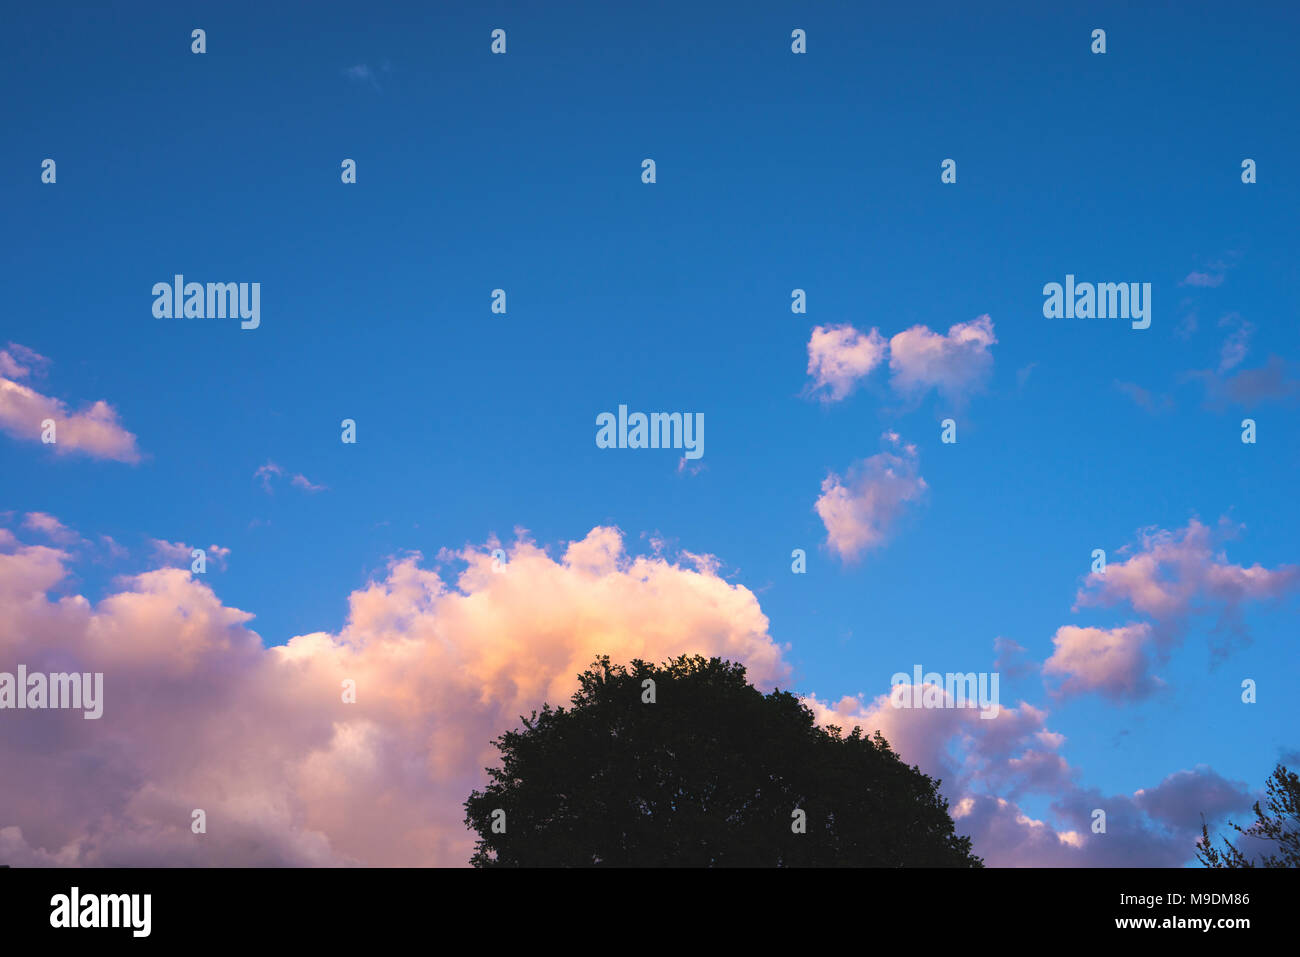 Pink cloud on a blue sky with tree at the foreground Stock Photo